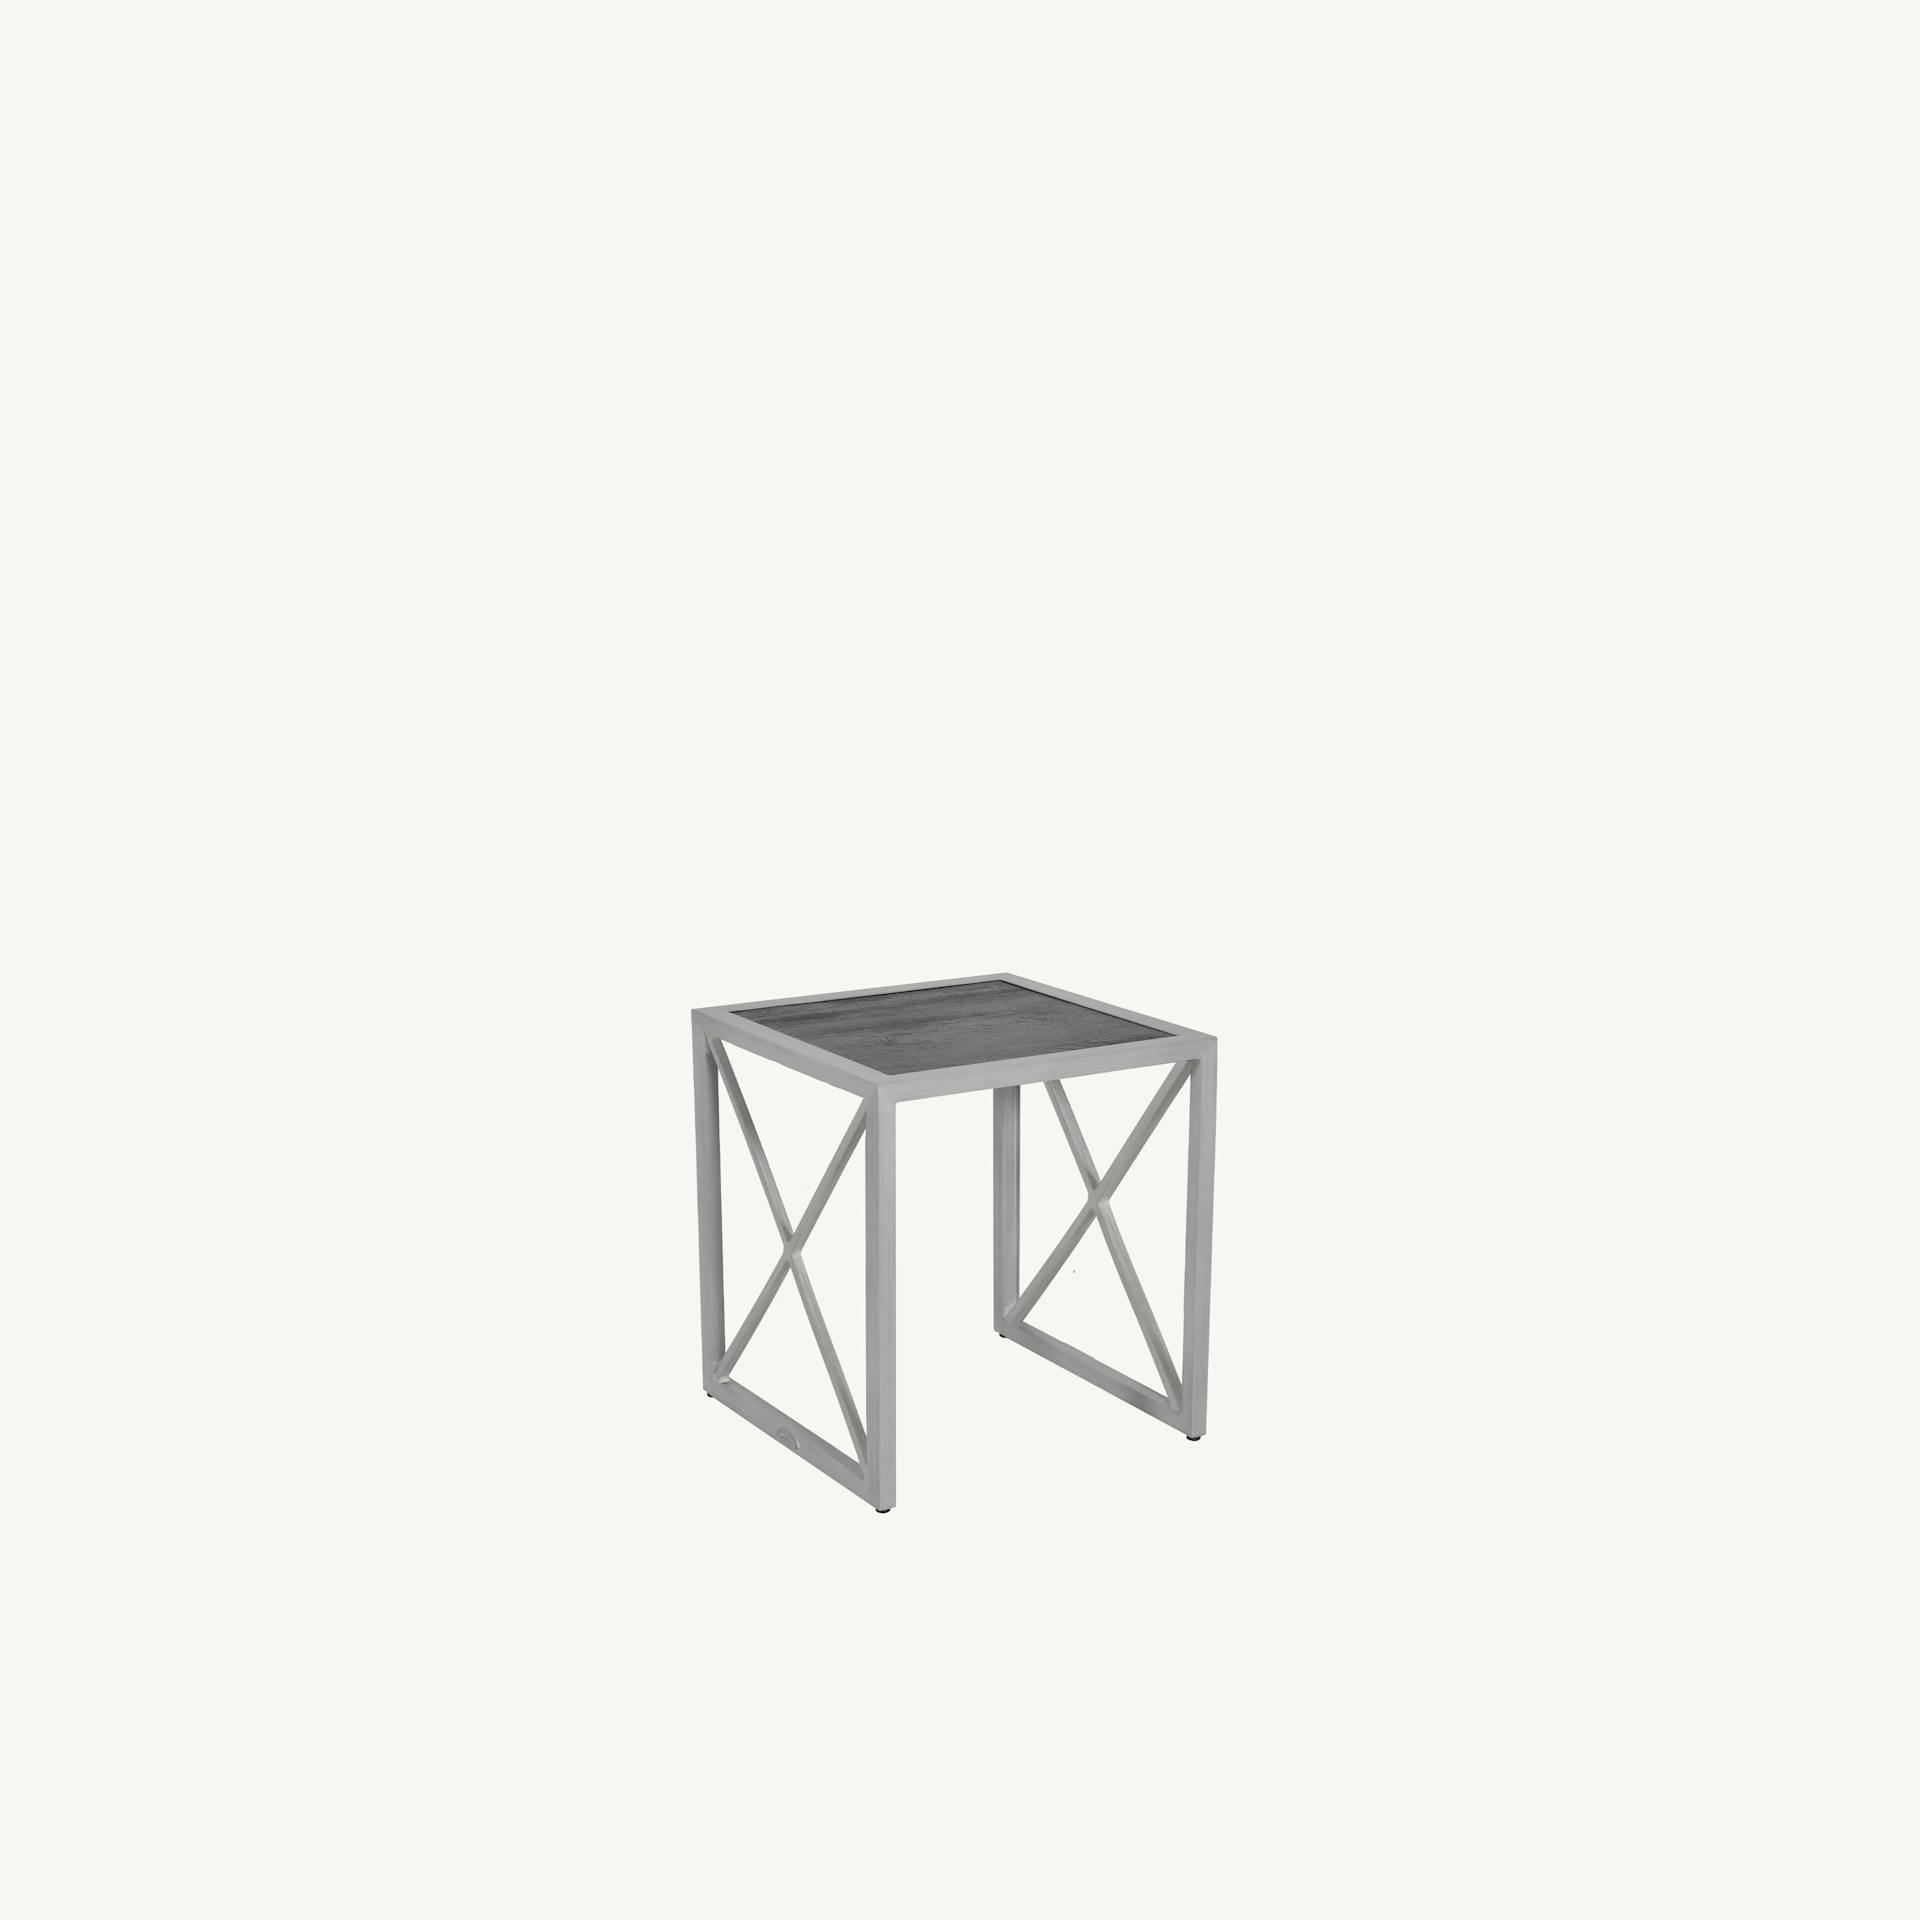 22" Square Nesting Side Tables - Xaria